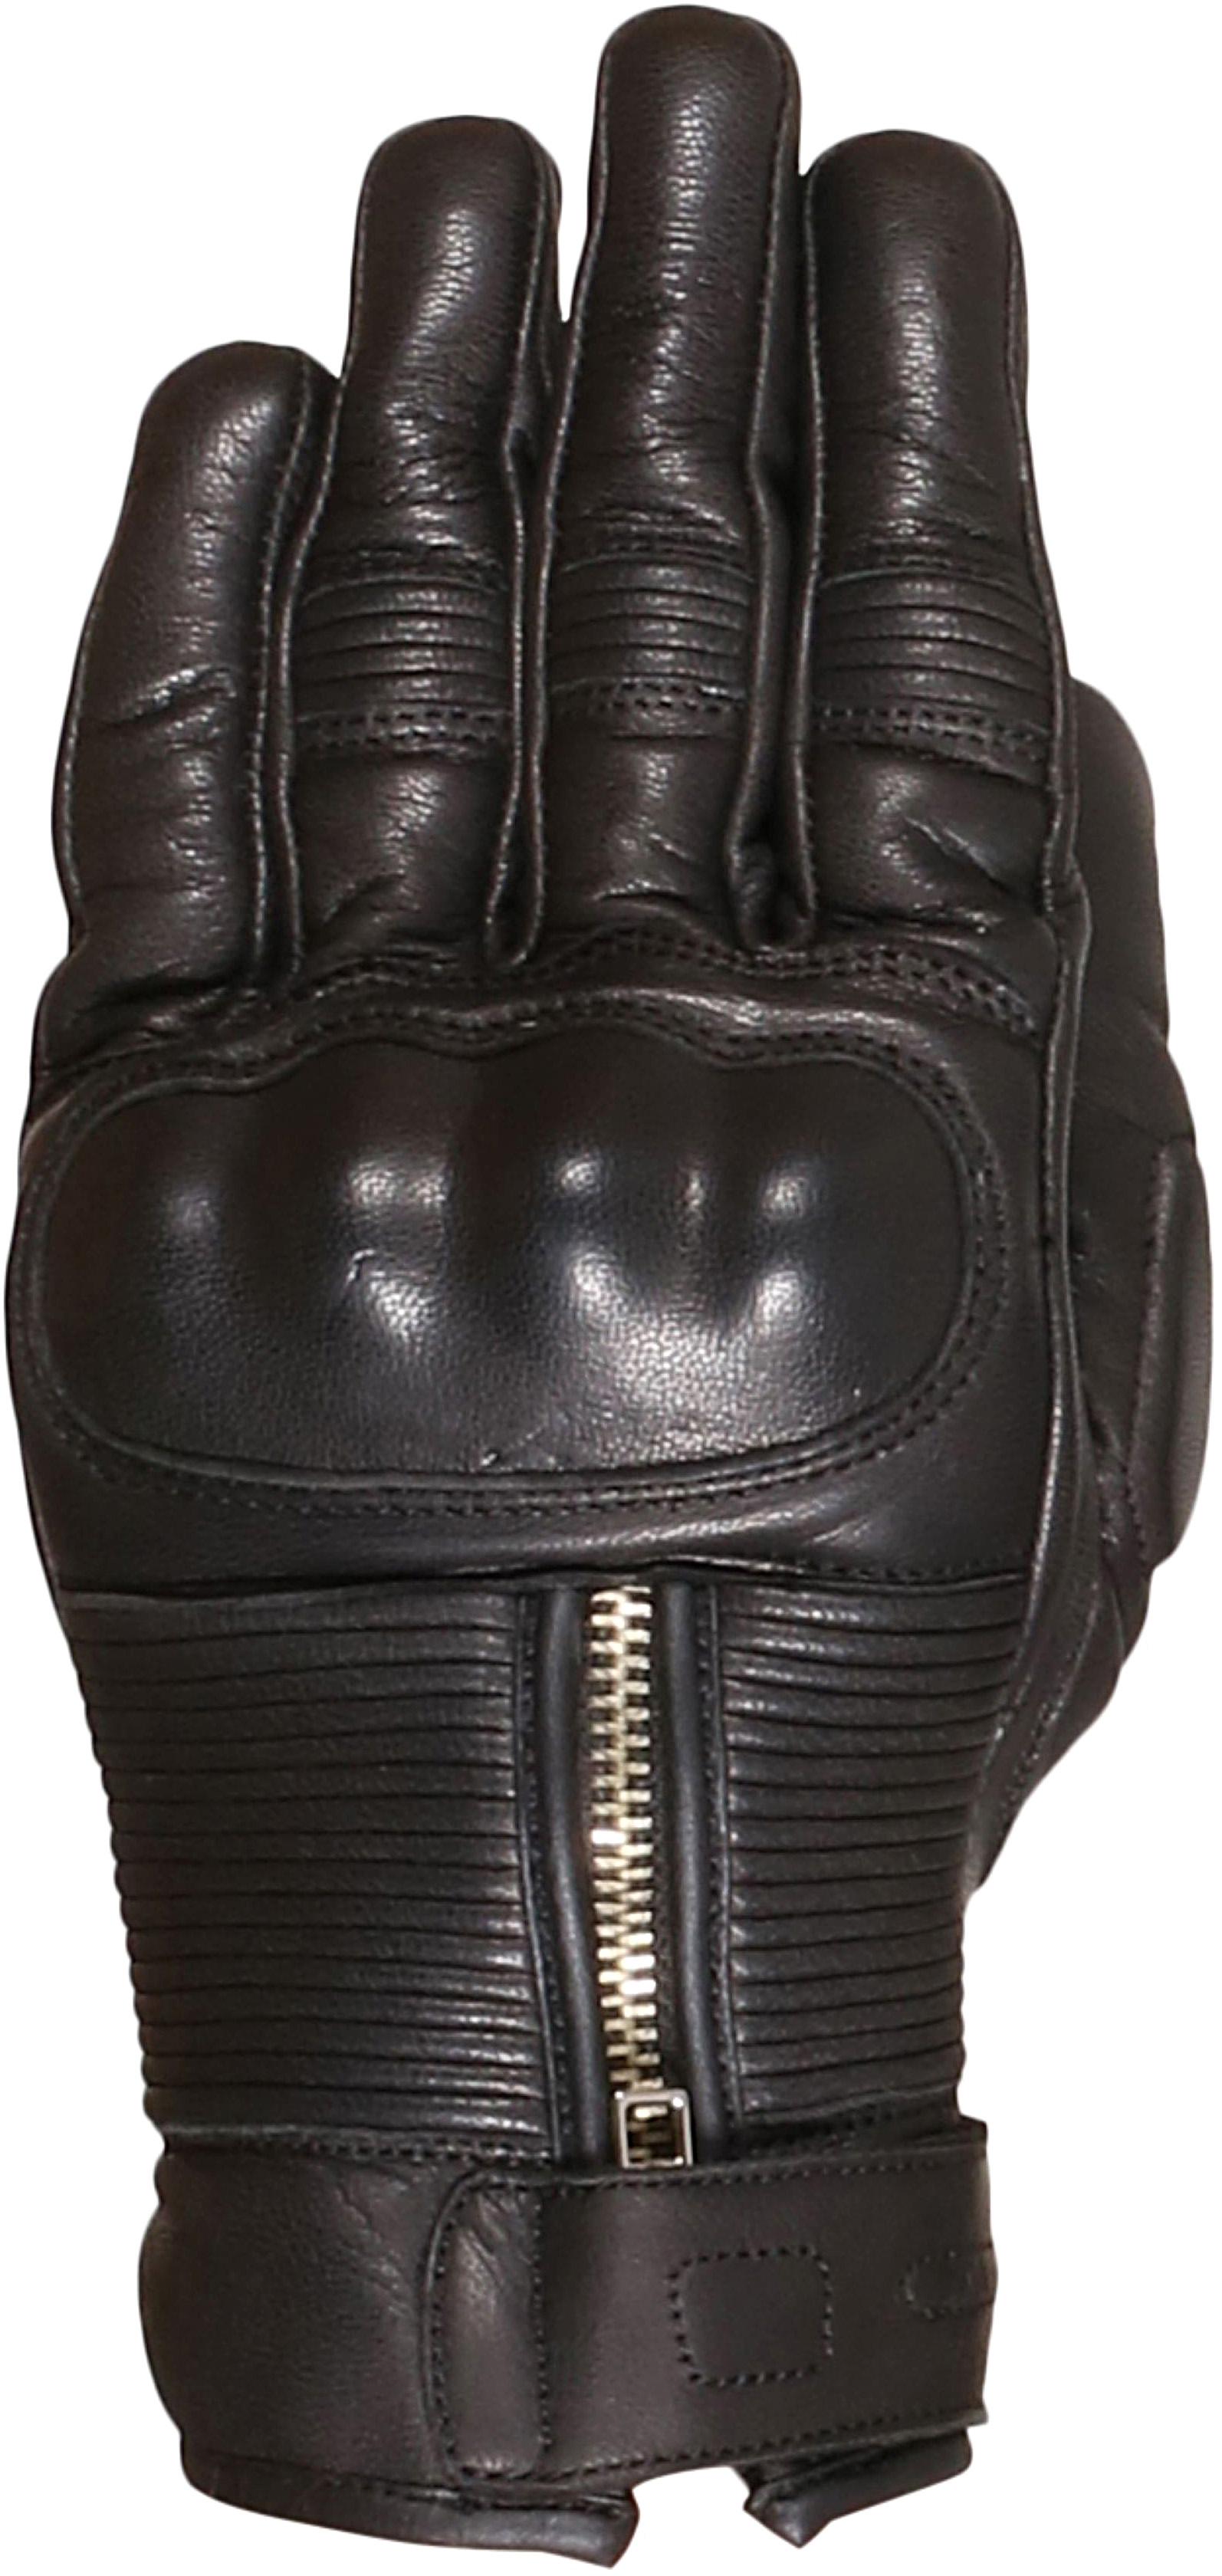 Weise Union Motorcycle Gloves - Black, 2Xl